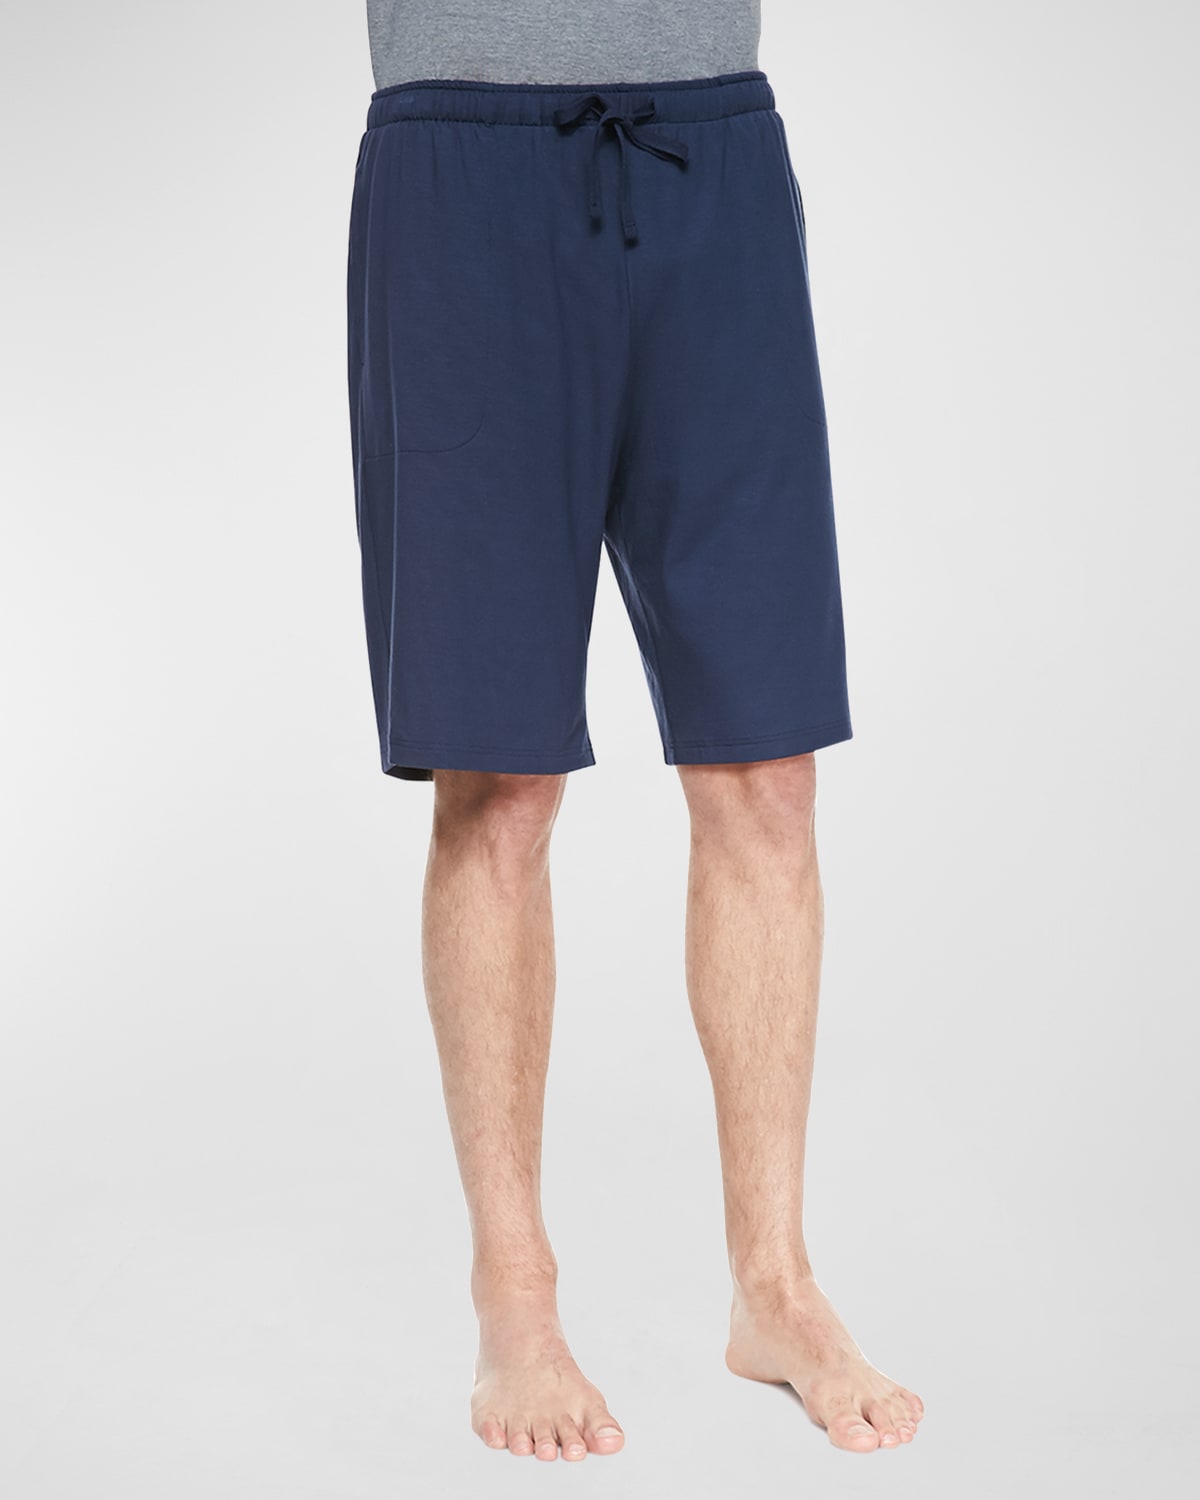 Men's Luxe Micromodal Lounge Shorts